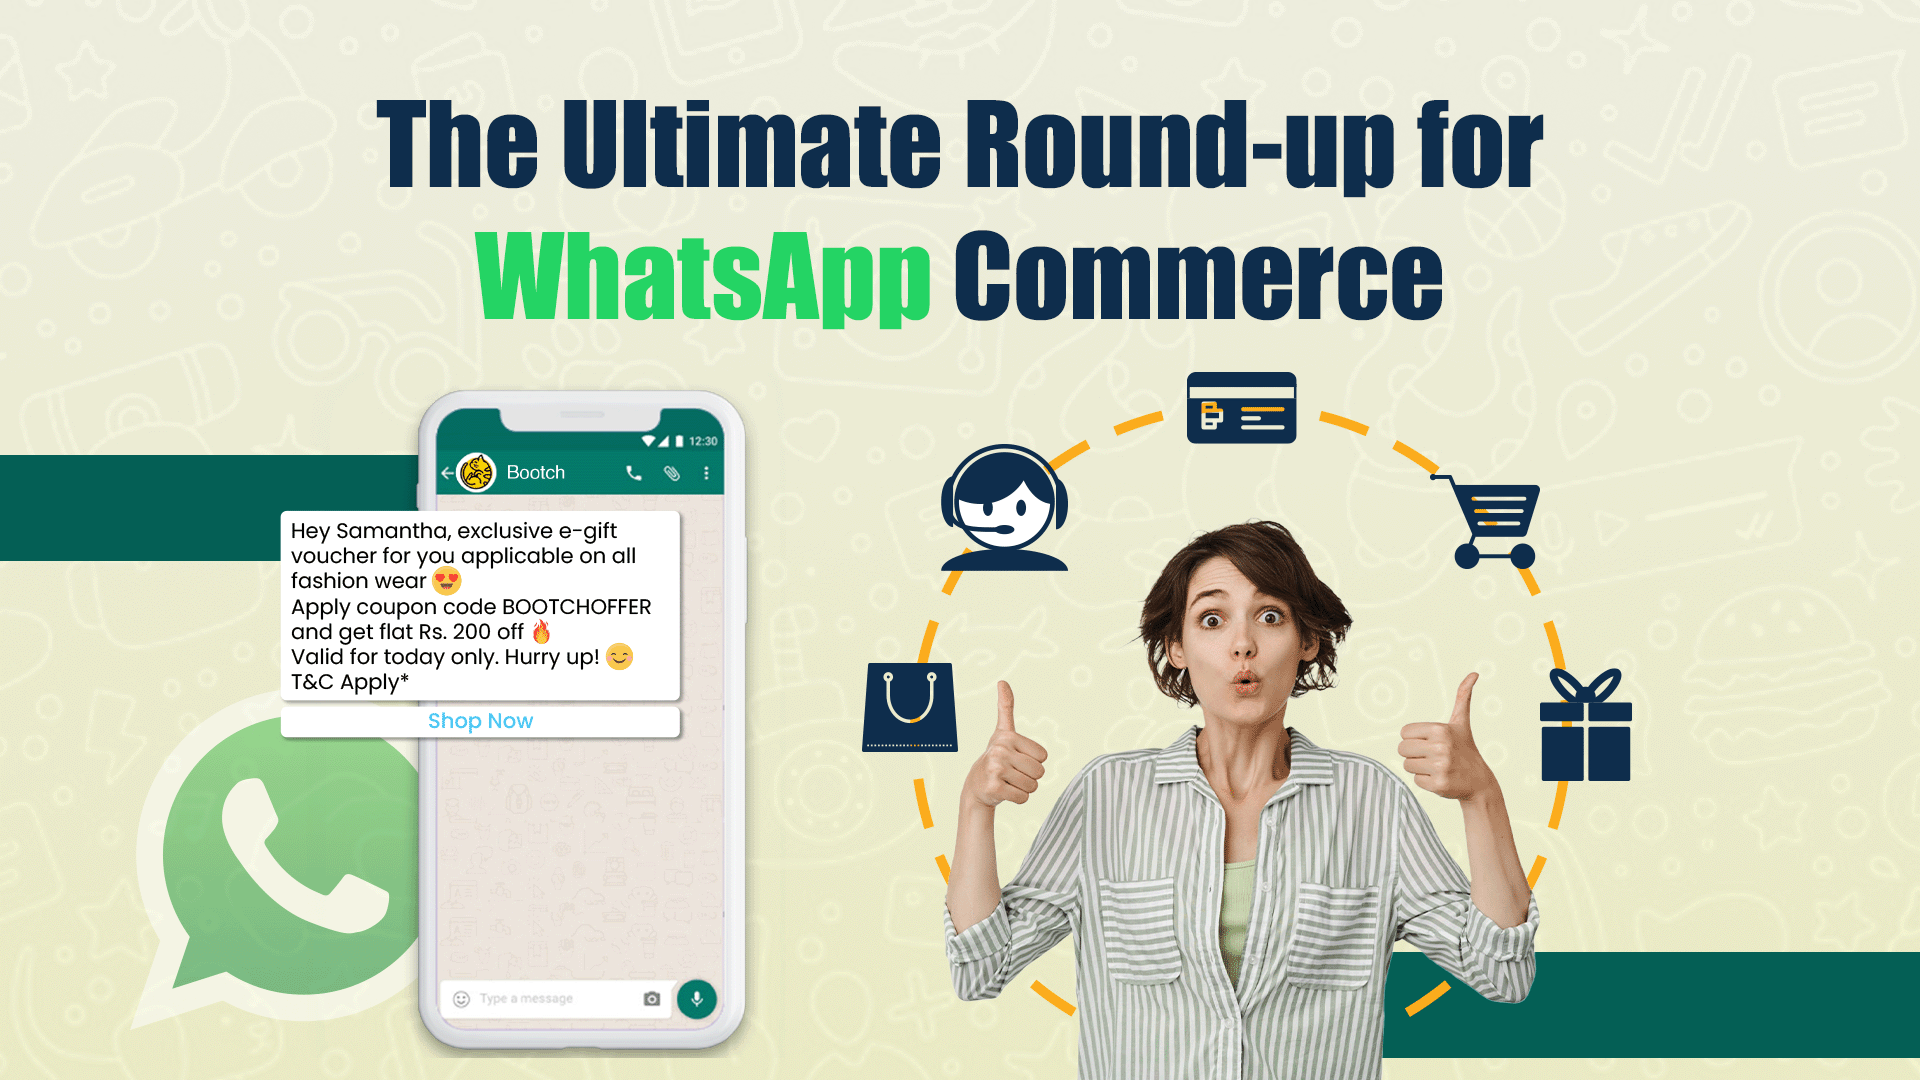 The Ultimate Round-up for WhatsApp Commerce